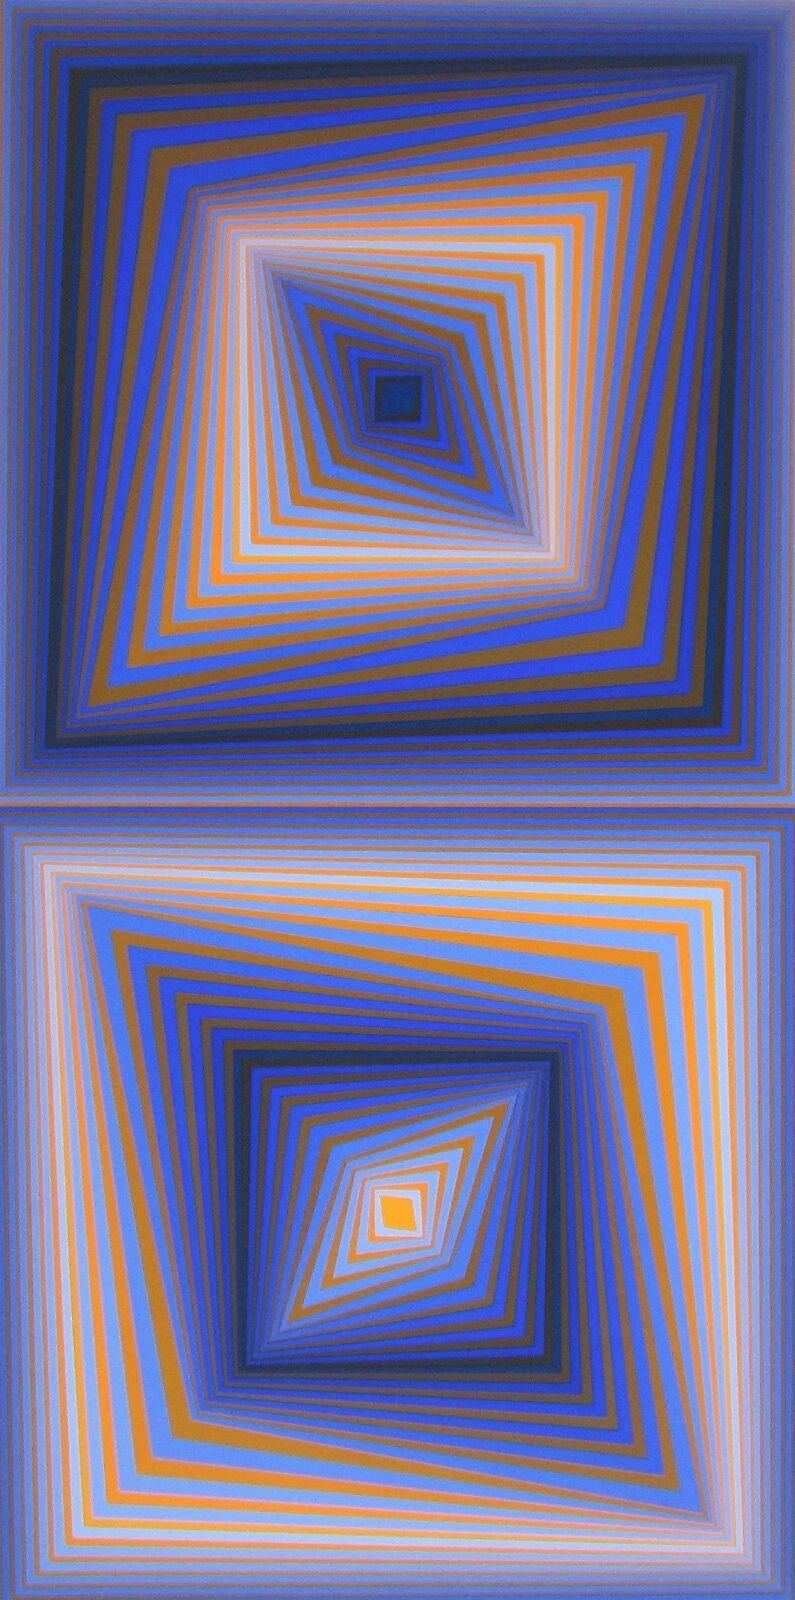 Artist: Victor Vasarely (1908-1997)
Title: BI-RHOMBS
Year: 1977
Medium: Silkscreen on Arches paper
Edition: 91/250, plus proofs
Size: 43.5 x 26 inches
Condition: Good
Inscription: Signed and numbered by the artist.
Notes:  Published by Atelier